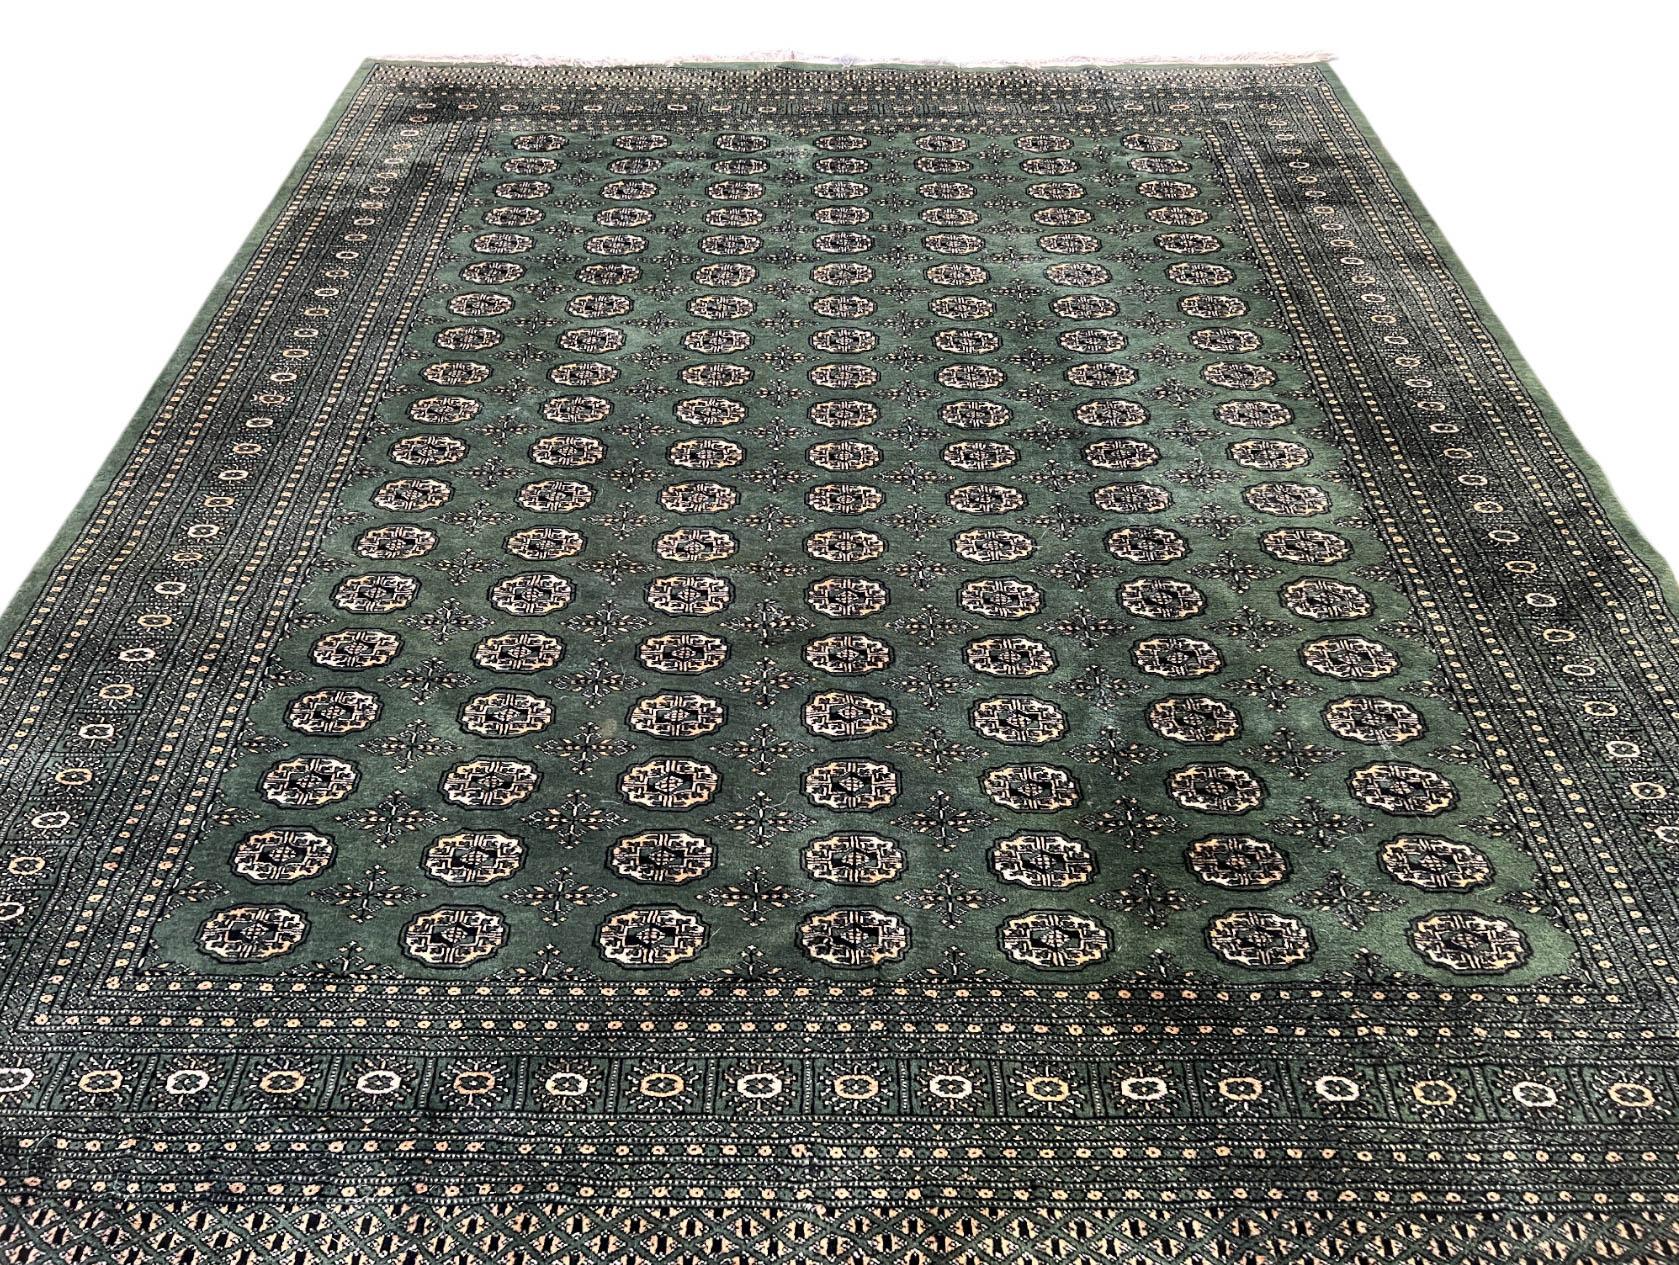 A handmade, vintage Uzbek Bokhara rug in dark green in the traditional design. Bokhara rugs fall into the  Oriental rug category that has existed for centuries. These rugs are known for their unique geometric designs and vibrant colors, and they